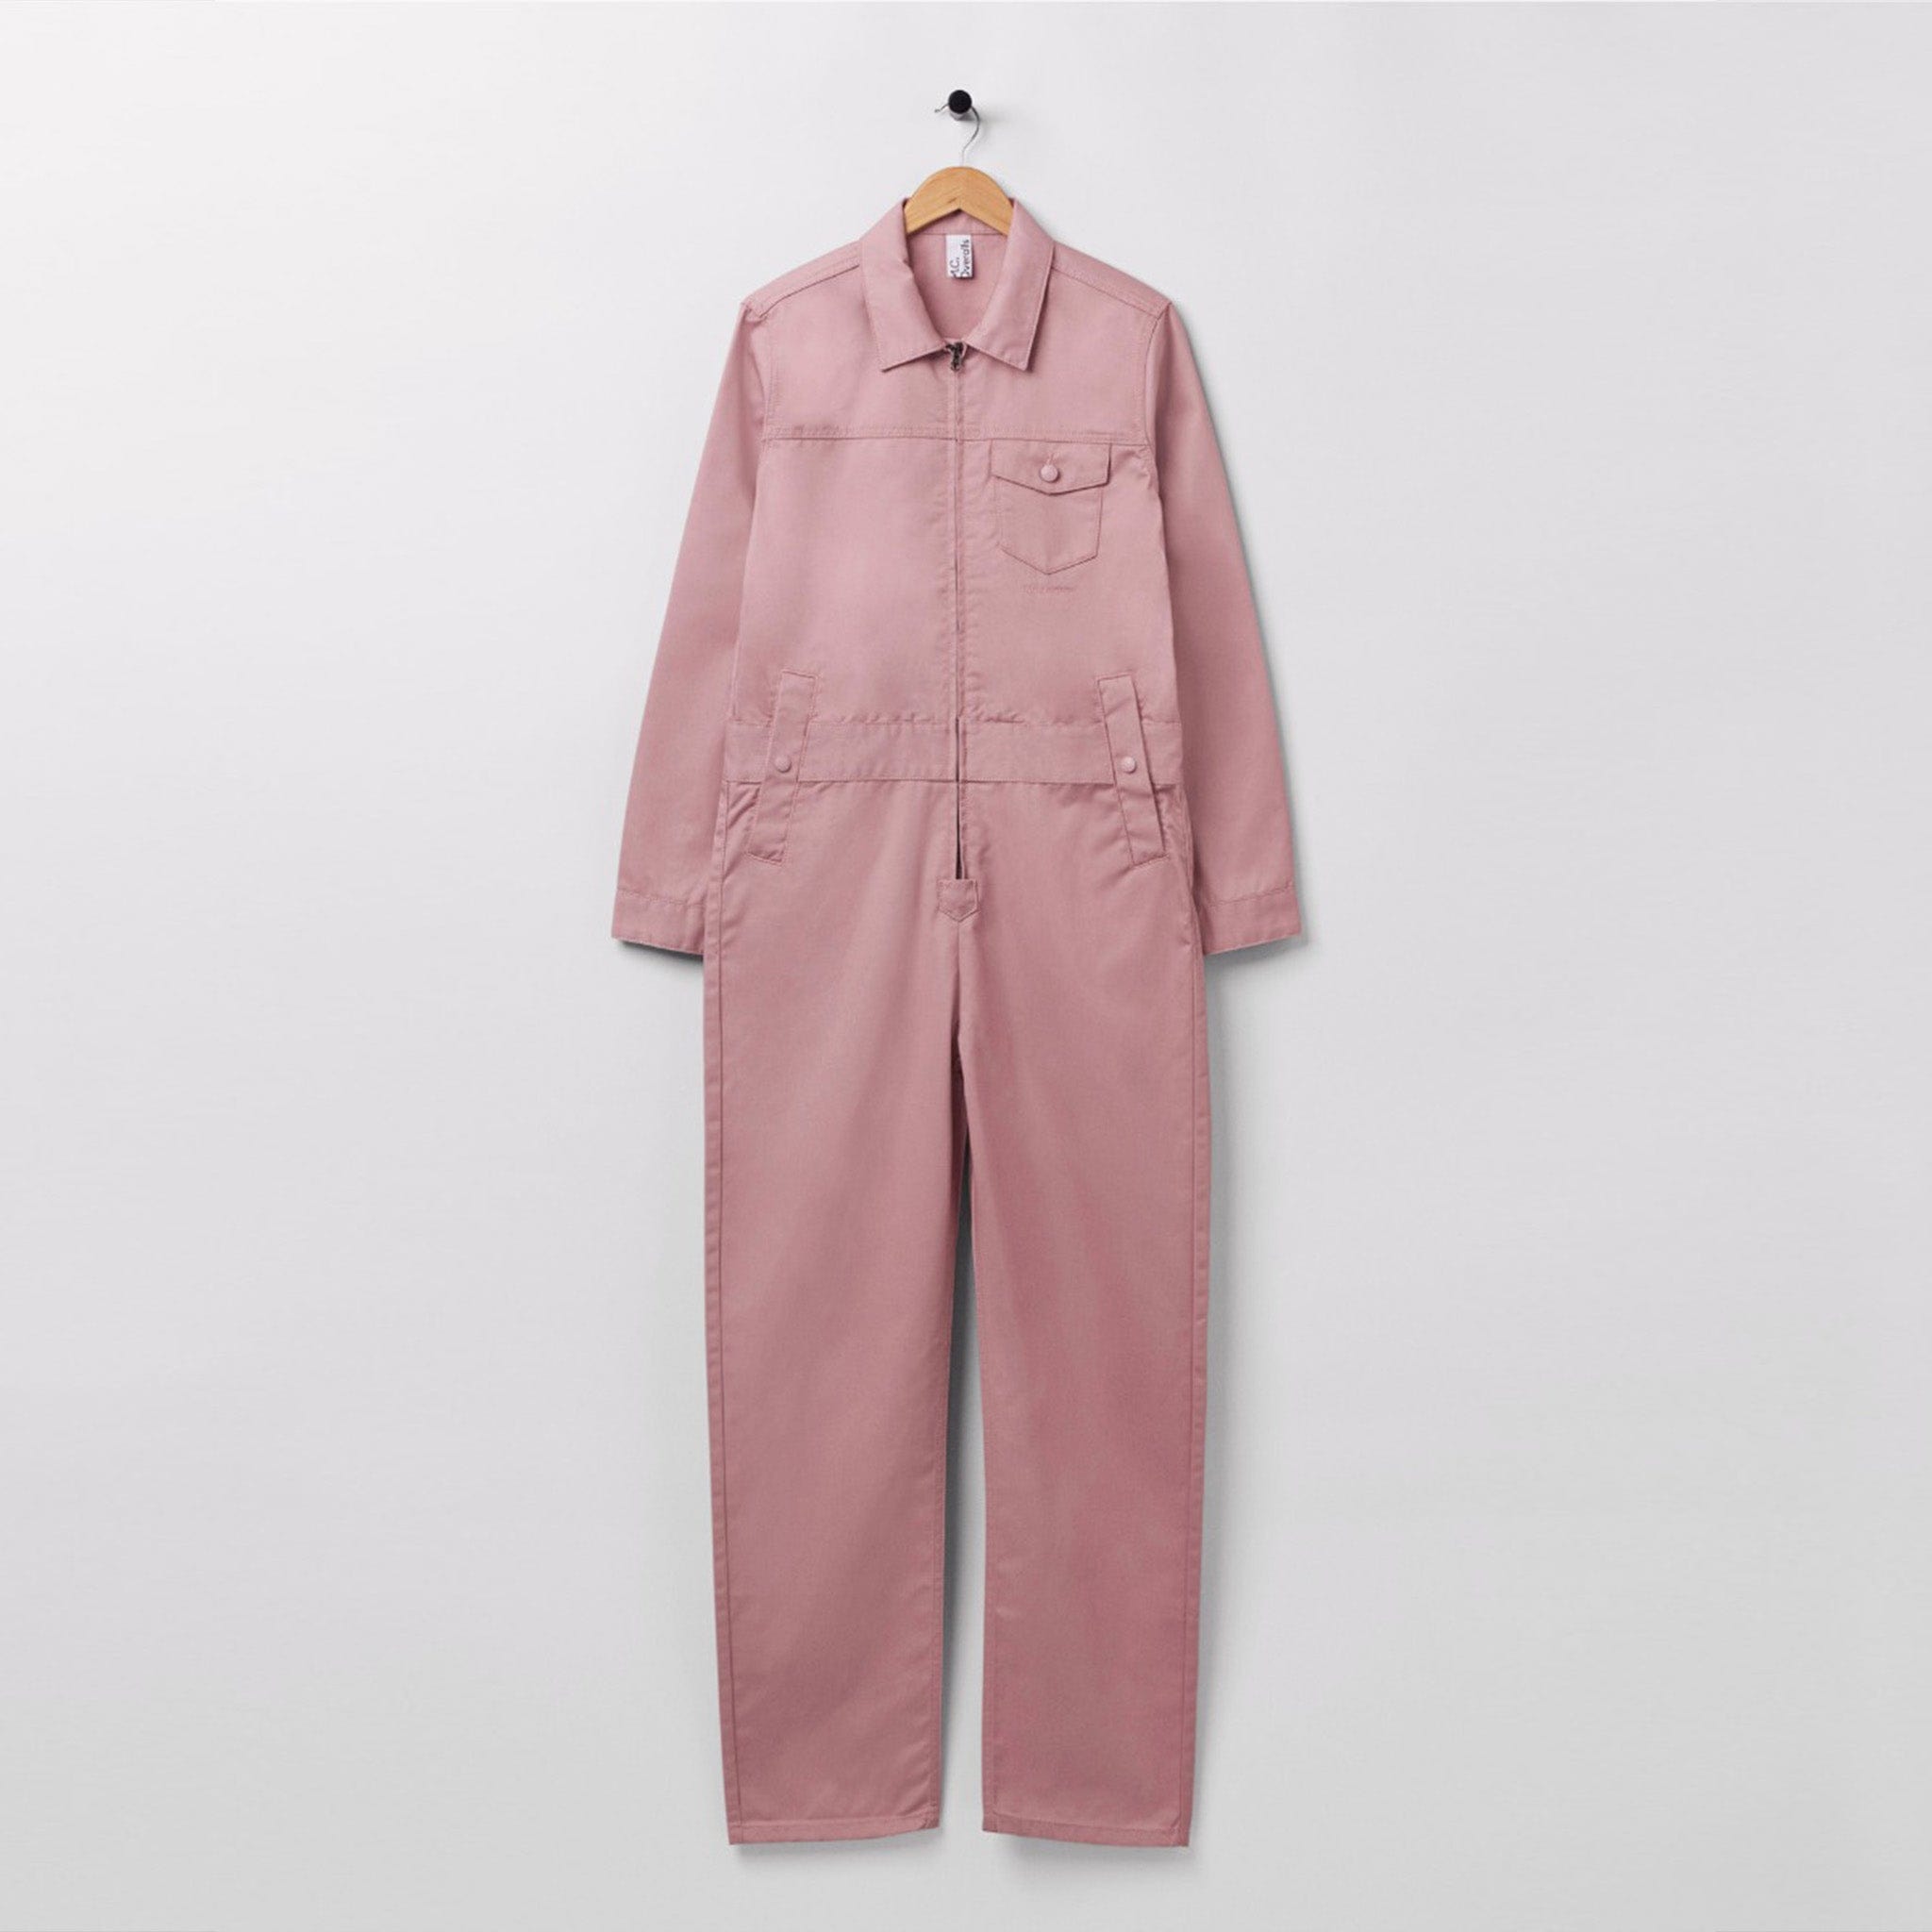 M.C.O's Dusty Pink Workwear Overalls in London, UK